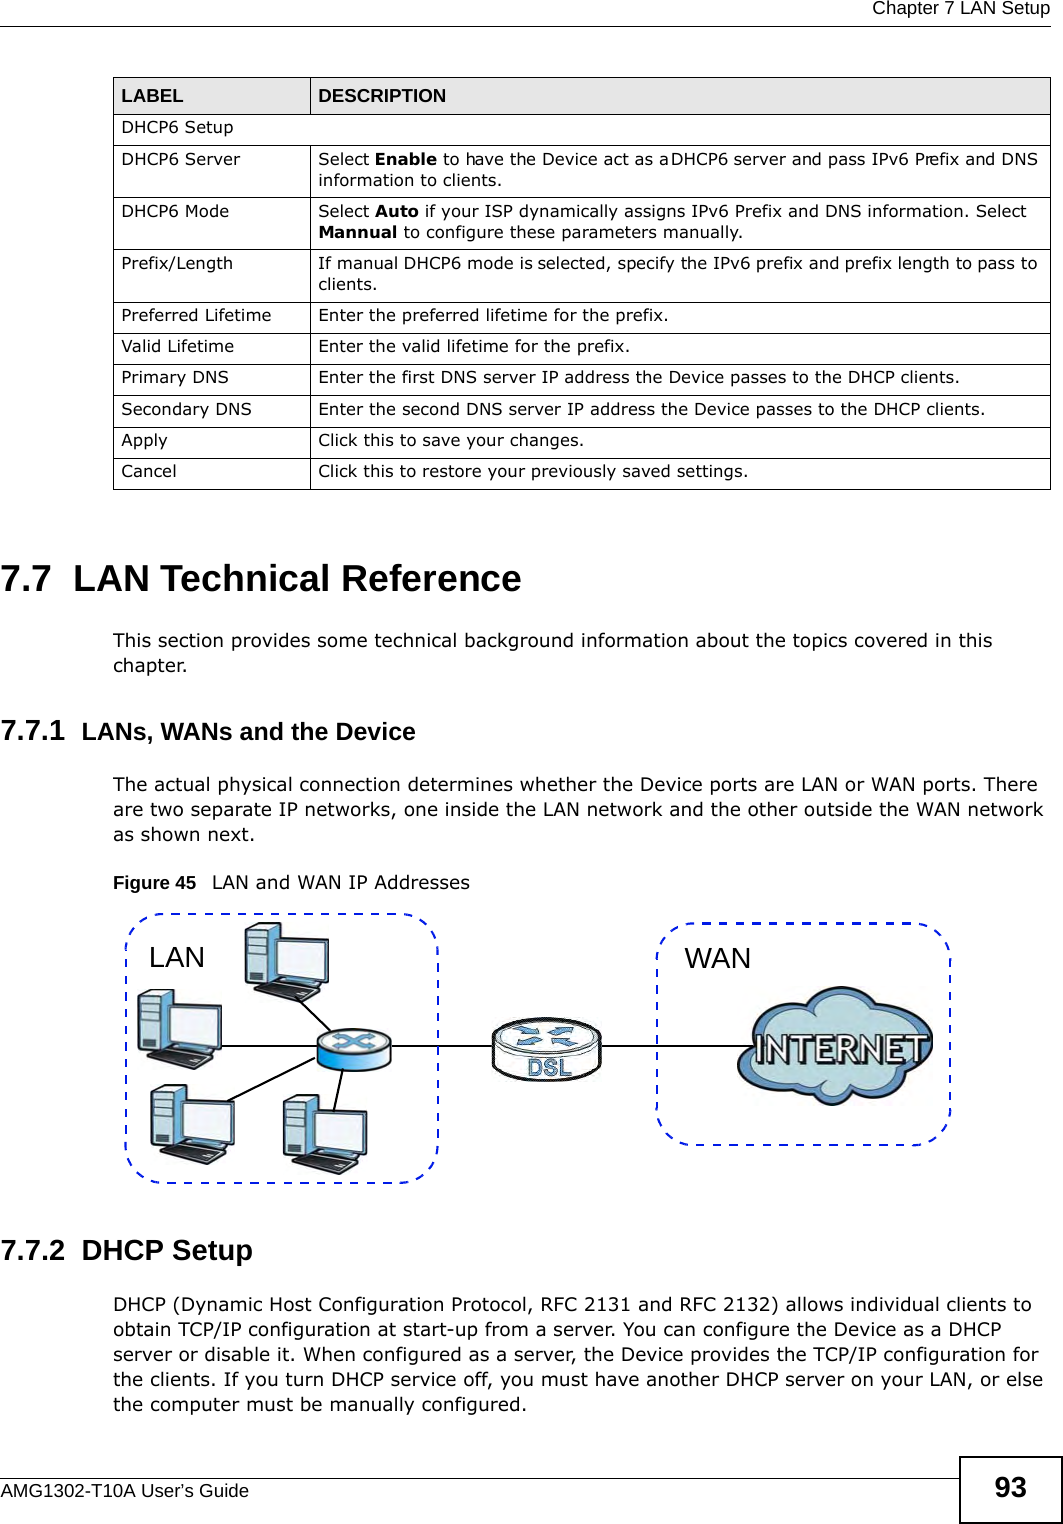  Chapter 7 LAN SetupAMG1302-T10A User’s Guide 937.7  LAN Technical ReferenceThis section provides some technical background information about the topics covered in this chapter.7.7.1  LANs, WANs and the DeviceThe actual physical connection determines whether the Device ports are LAN or WAN ports. There are two separate IP networks, one inside the LAN network and the other outside the WAN network as shown next.Figure 45   LAN and WAN IP Addresses7.7.2  DHCP SetupDHCP (Dynamic Host Configuration Protocol, RFC 2131 and RFC 2132) allows individual clients to obtain TCP/IP configuration at start-up from a server. You can configure the Device as a DHCP server or disable it. When configured as a server, the Device provides the TCP/IP configuration for the clients. If you turn DHCP service off, you must have another DHCP server on your LAN, or else the computer must be manually configured. DHCP6 Setup DHCP6 Server Select Enable to have the Device act as a DHCP6 server and pass IPv6 Prefix and DNS information to clients.DHCP6 Mode Select Auto if your ISP dynamically assigns IPv6 Prefix and DNS information. Select Mannual to configure these parameters manually.Prefix/Length If manual DHCP6 mode is selected, specify the IPv6 prefix and prefix length to pass to clients. Preferred Lifetime Enter the preferred lifetime for the prefix.Valid Lifetime Enter the valid lifetime for the prefix.Primary DNS Enter the first DNS server IP address the Device passes to the DHCP clients.Secondary DNS  Enter the second DNS server IP address the Device passes to the DHCP clients.Apply Click this to save your changes.Cancel Click this to restore your previously saved settings.LABEL DESCRIPTIONWANLAN